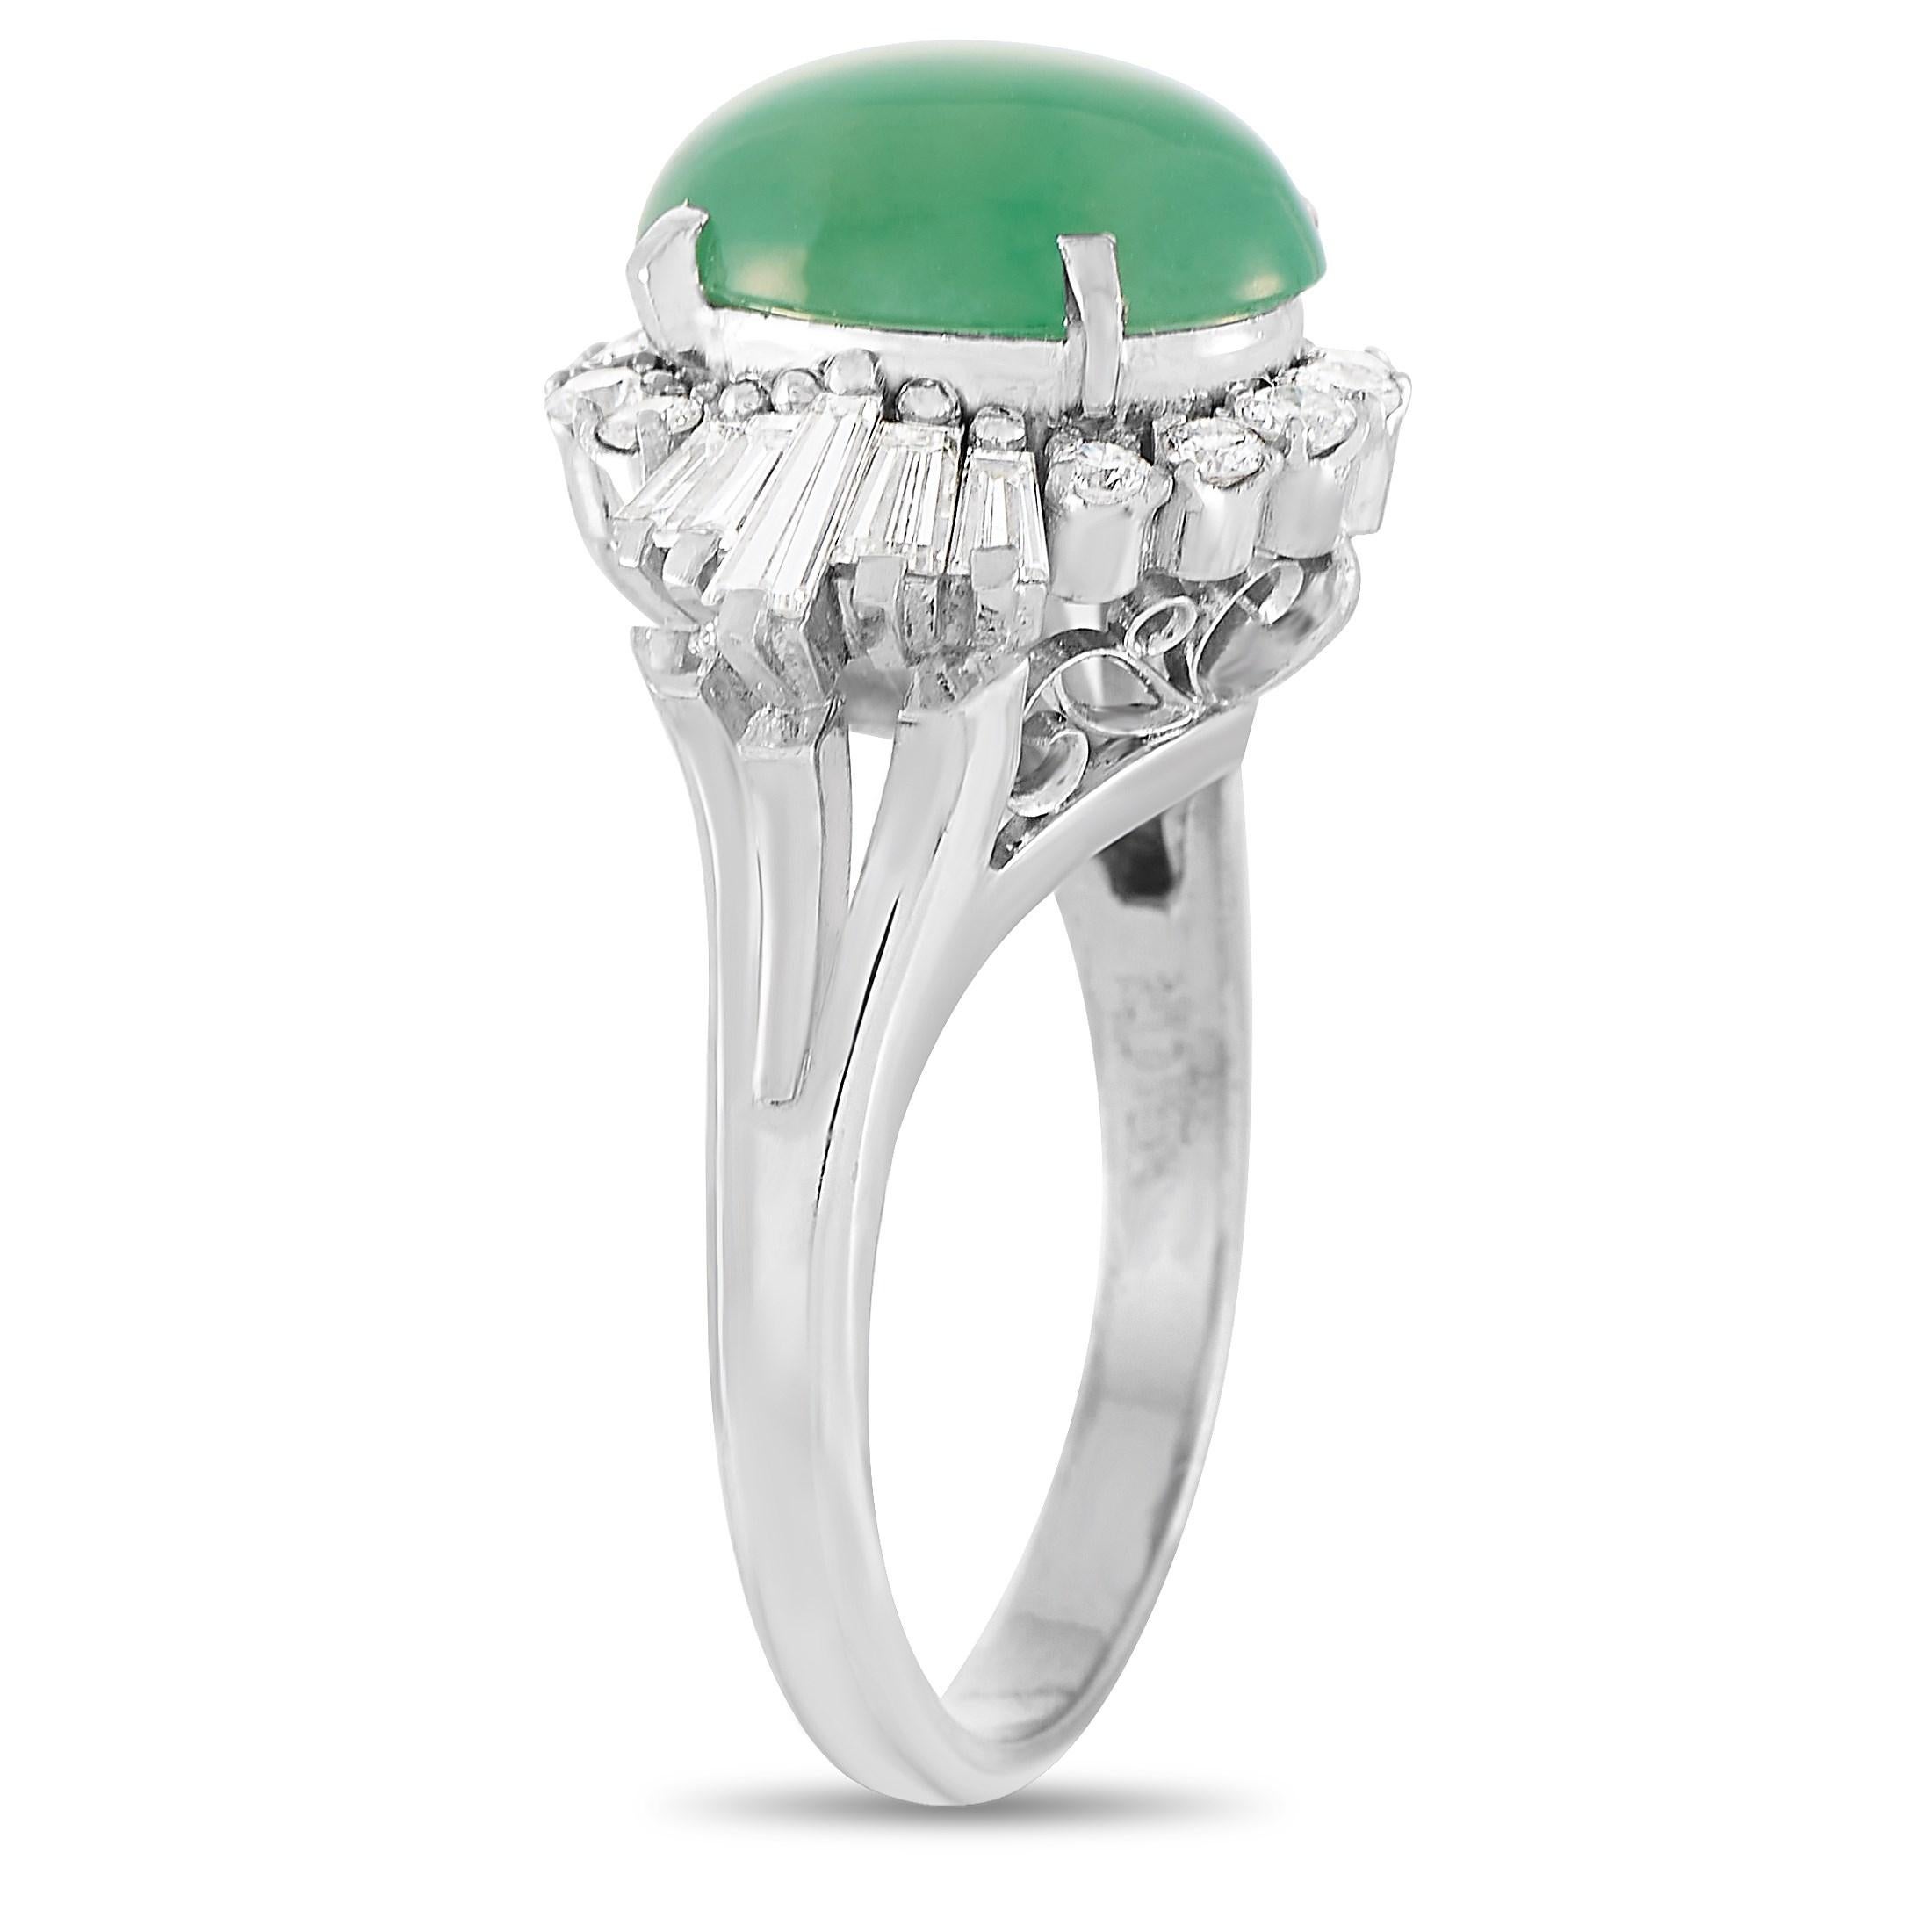 This pretty LB Exclusive ring will brighten up any day. The band is made with platinum and set with a halo of baguette and round diamonds totaling 1.05 carats around a 3.45 carat oval jade center stone. The ring has a band thickness of 3 mm, a top